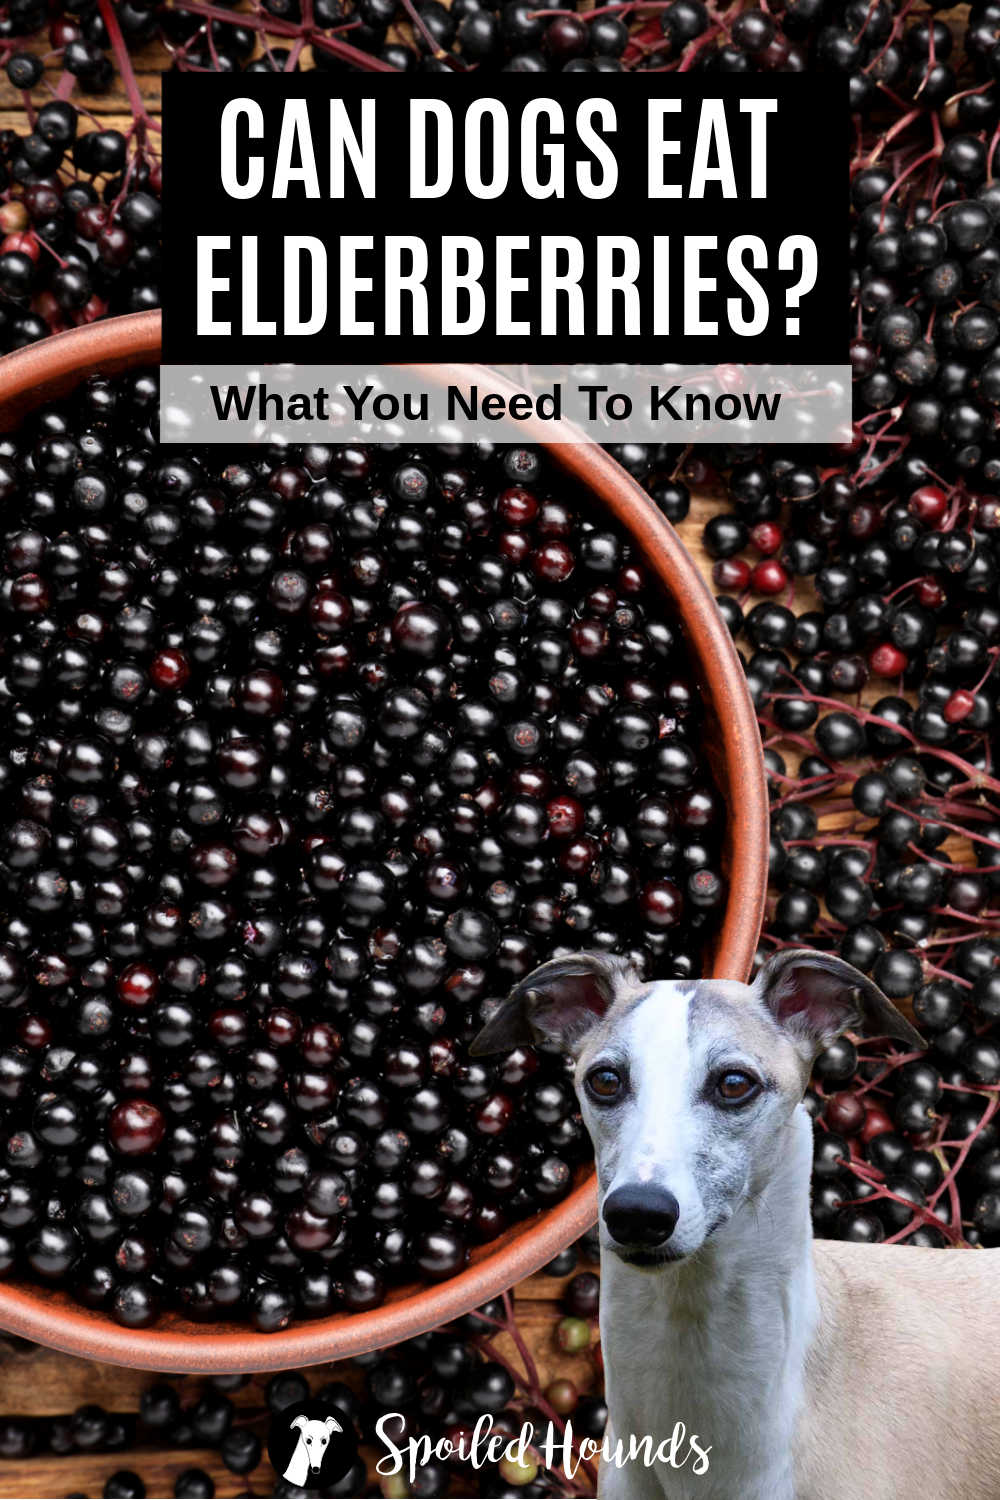 Whippet dog in front of elderberries in a bowl.